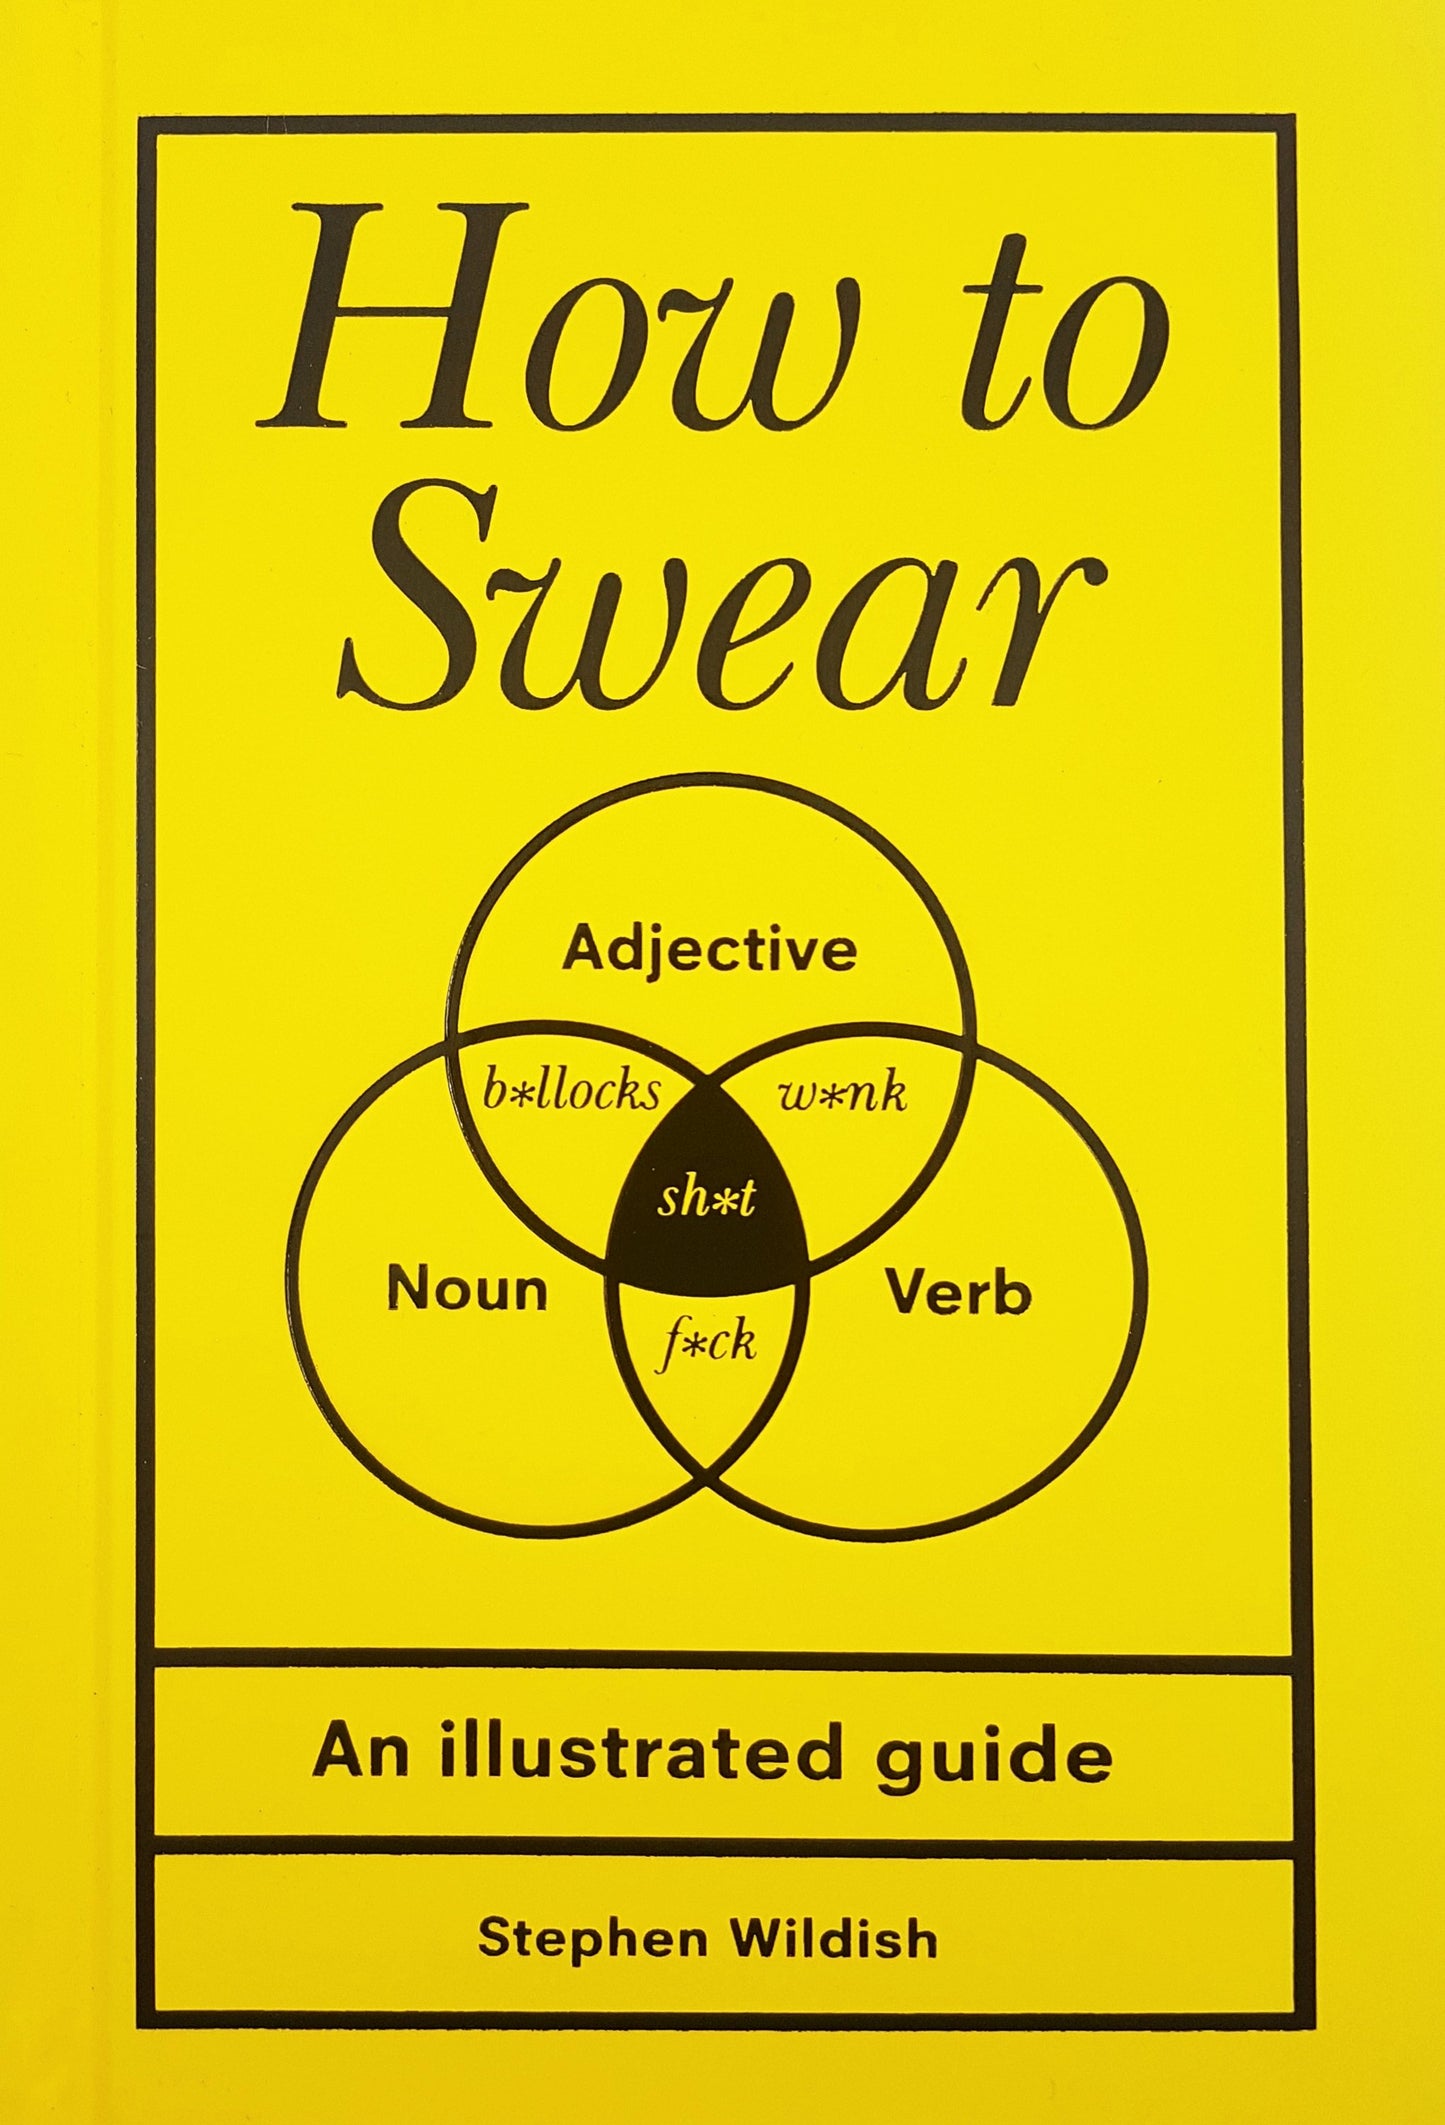 How to Swear: An Illustrated Guide